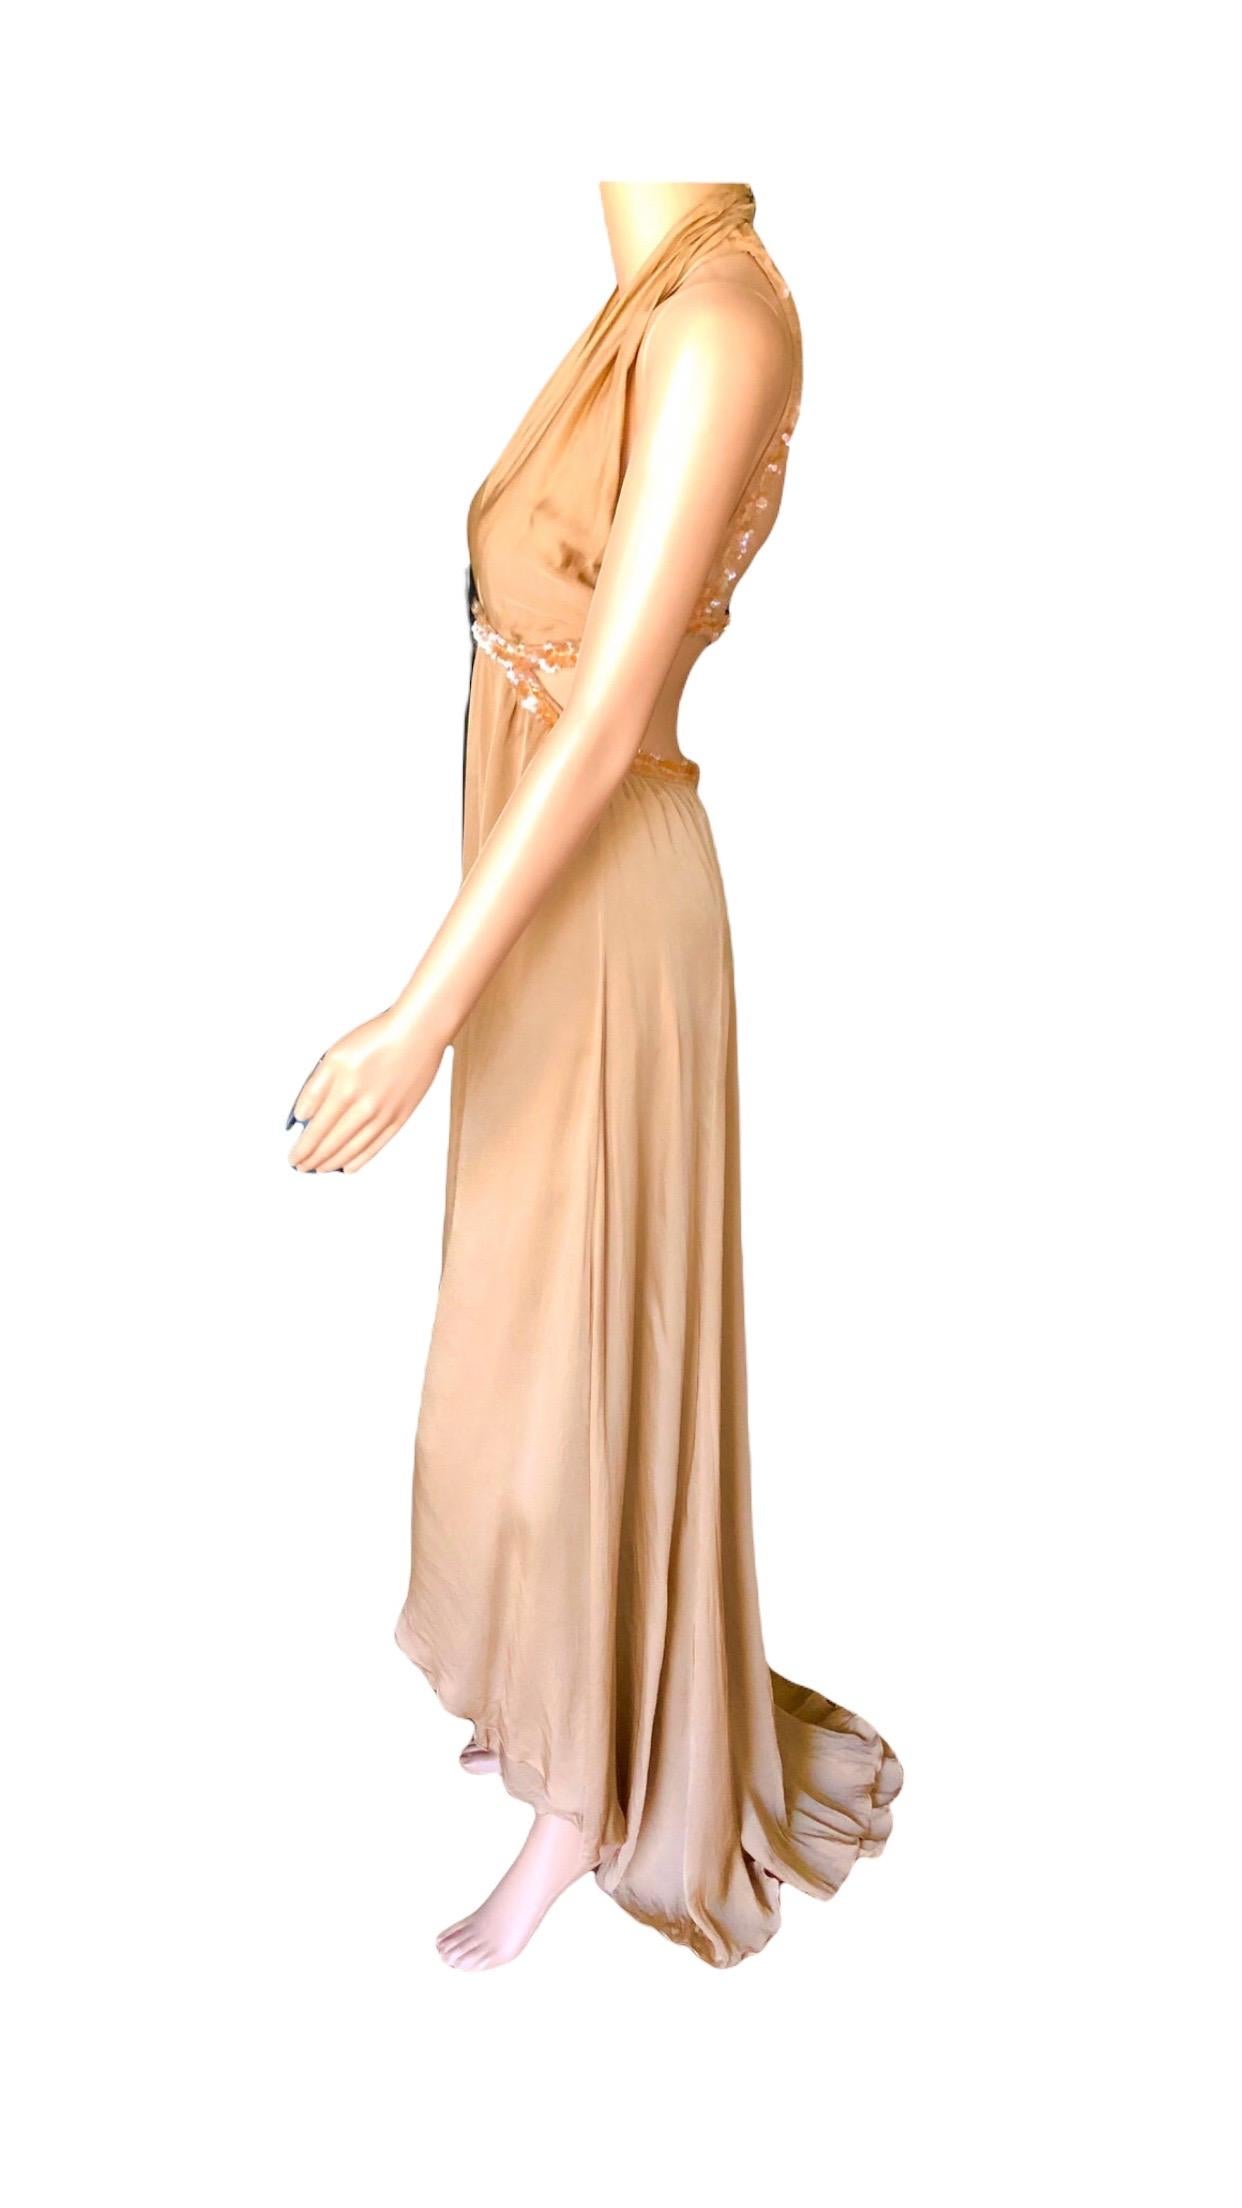 Chanel S/S 2003 Embellished Cut-Out Plunging Open Back Evening Dress Gown For Sale 11